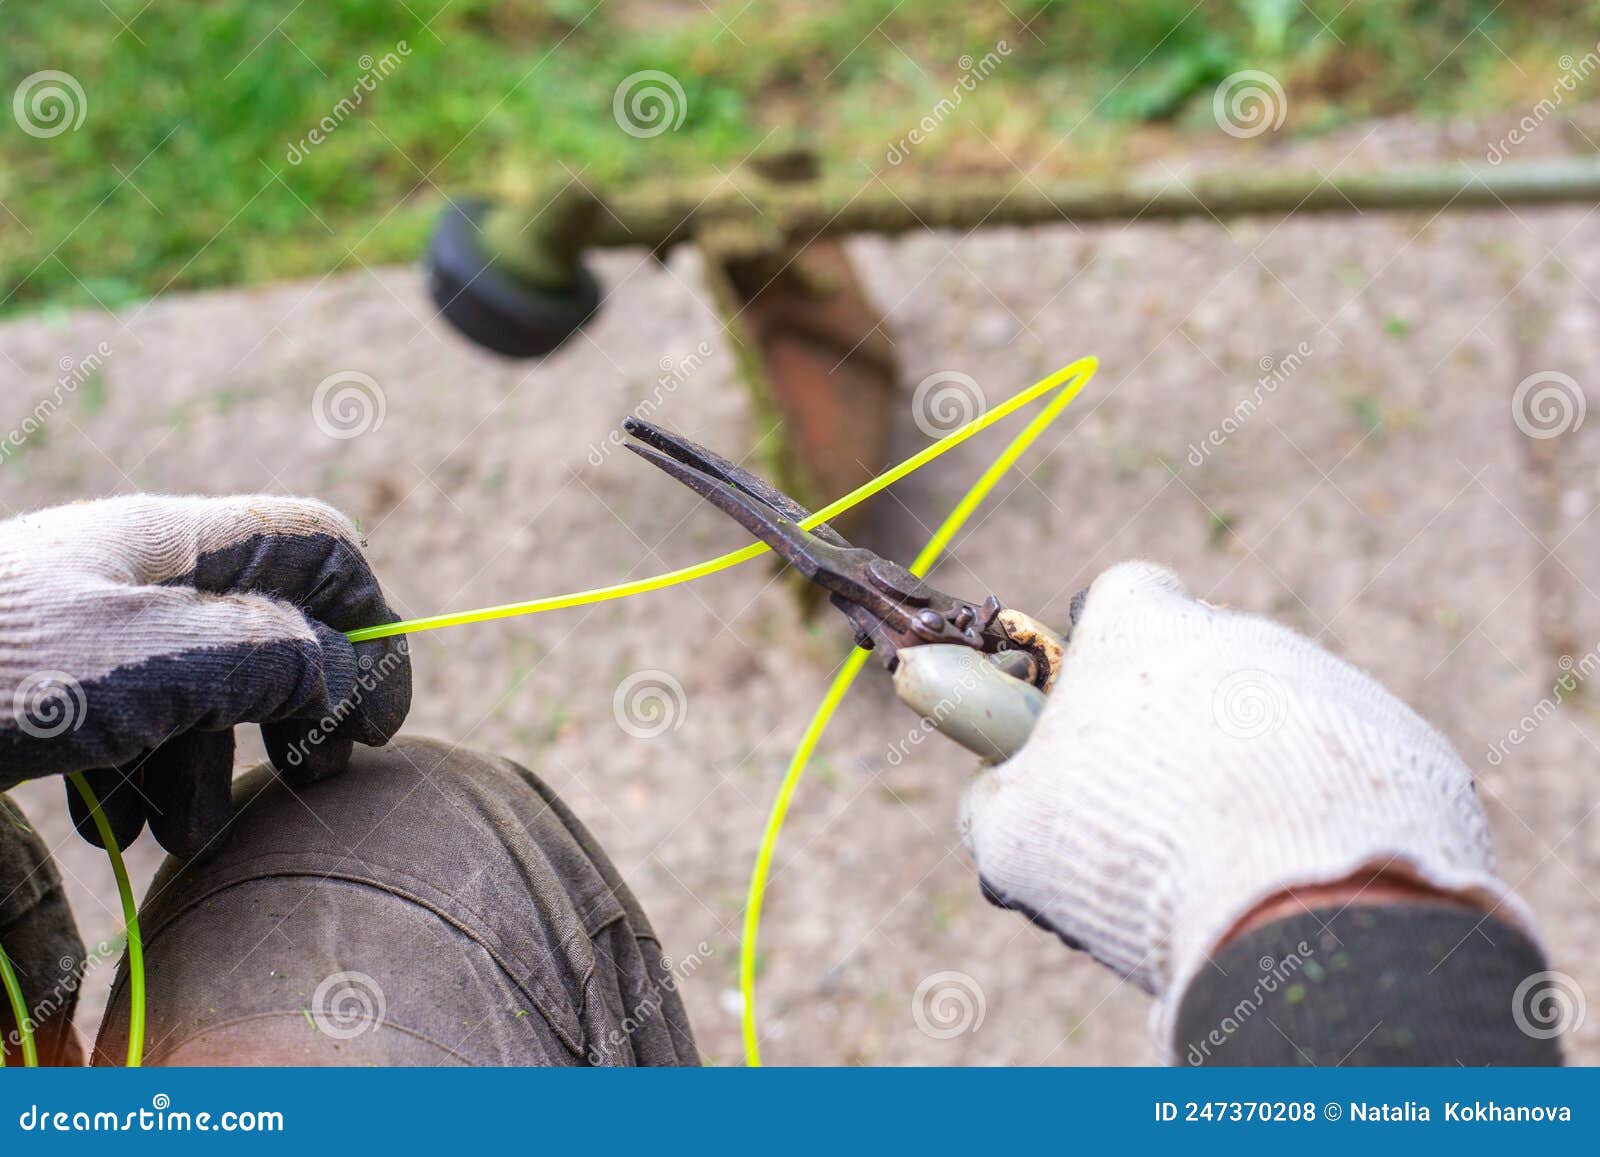 A Gardener with a Pruner Cuts a Piece of Fishing Line for a Gas Mower.  Spring Lawn Mowing, Lawn Care Stock Photo - Image of tool, trimmer:  247370208